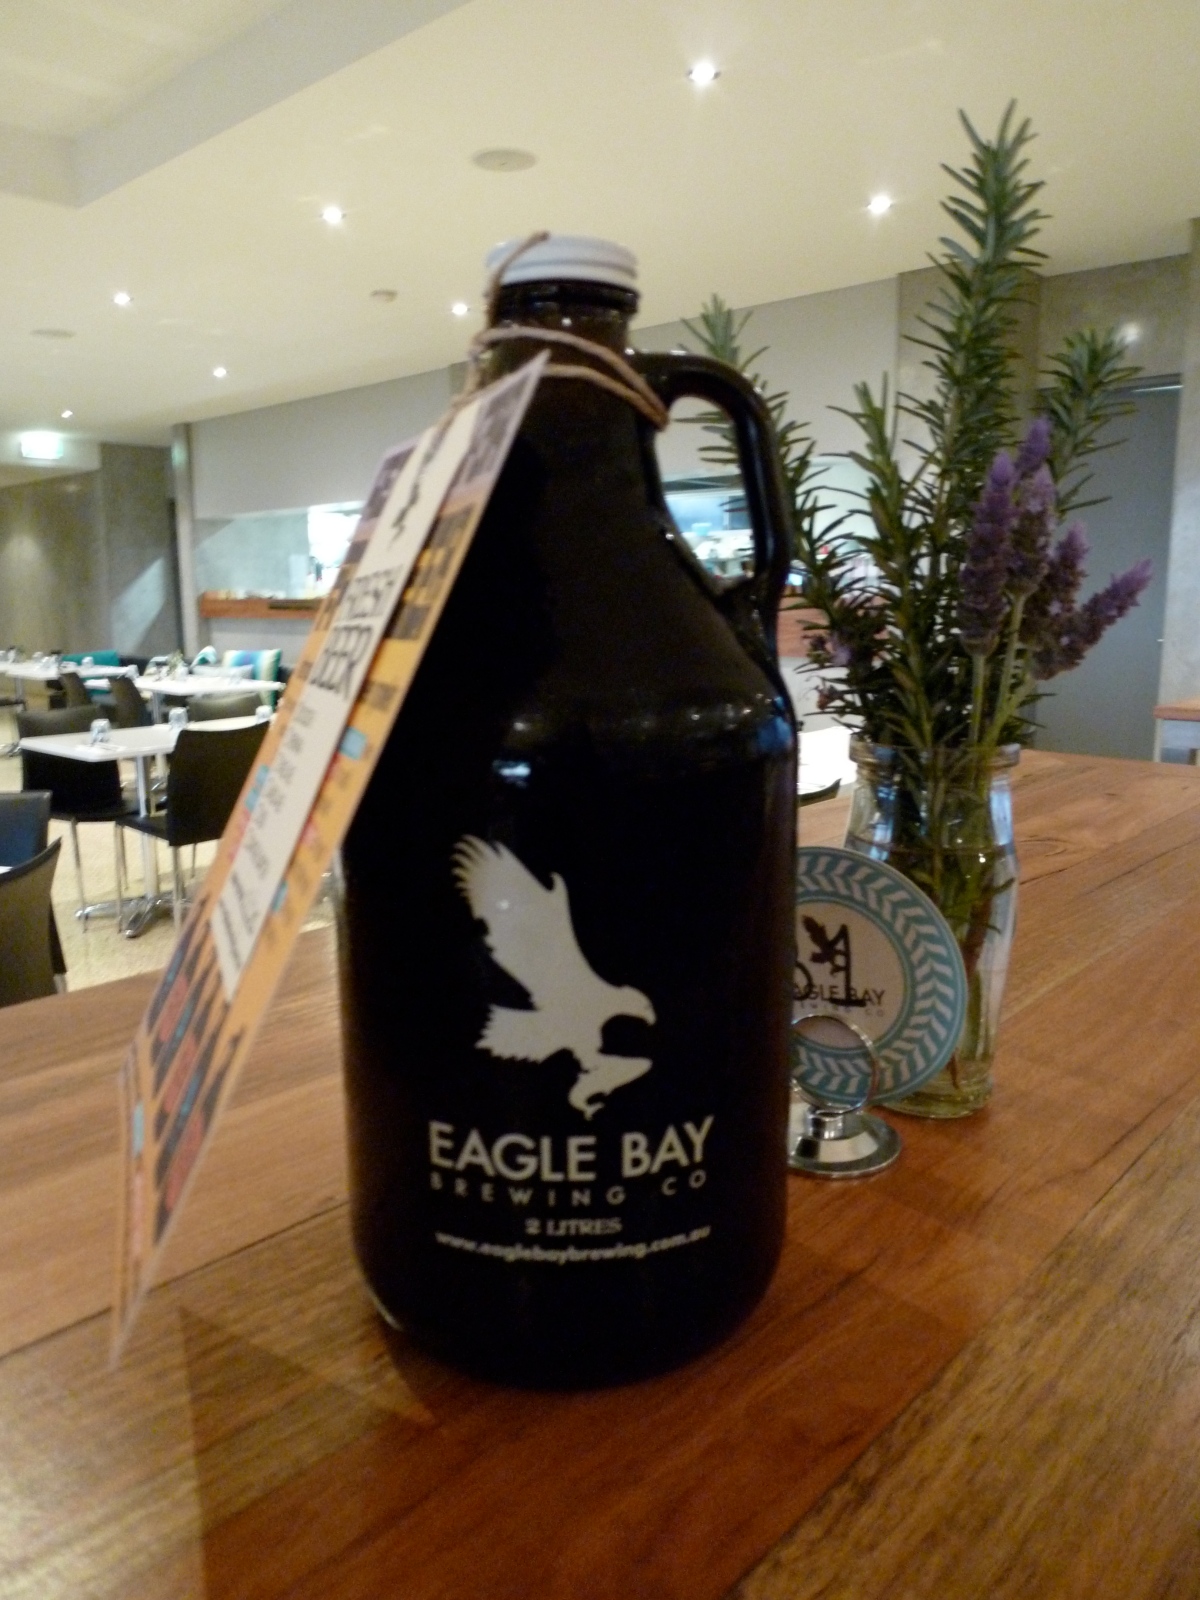 5 Minutes with Nick from Eagle Bay Brewing